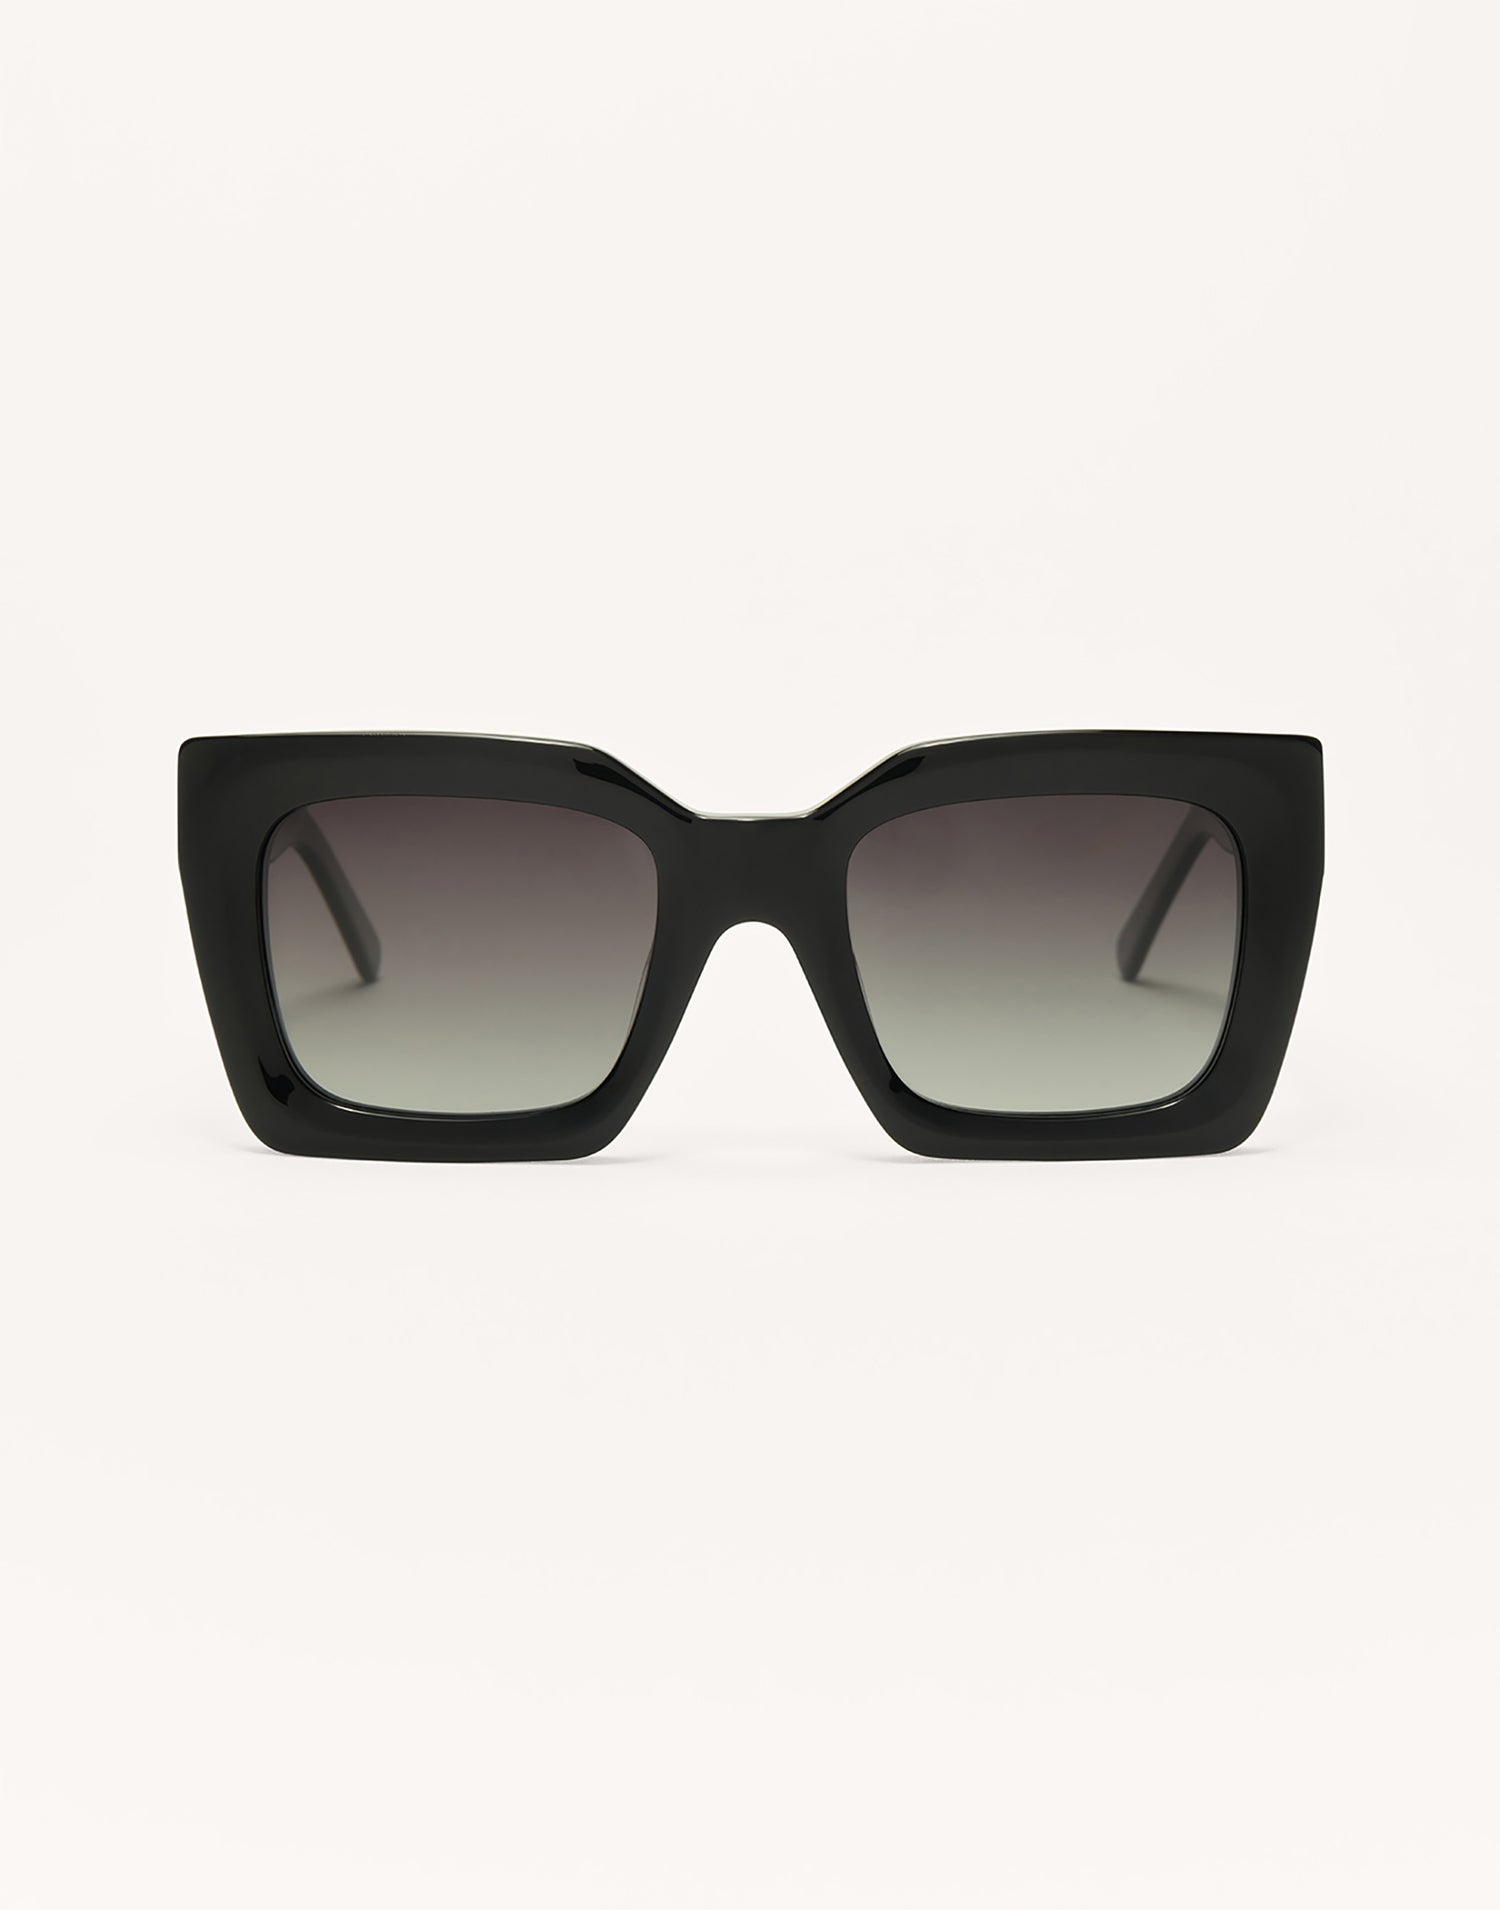 Early Riser Sunglasses by Z Supply in Polished Black - Front View